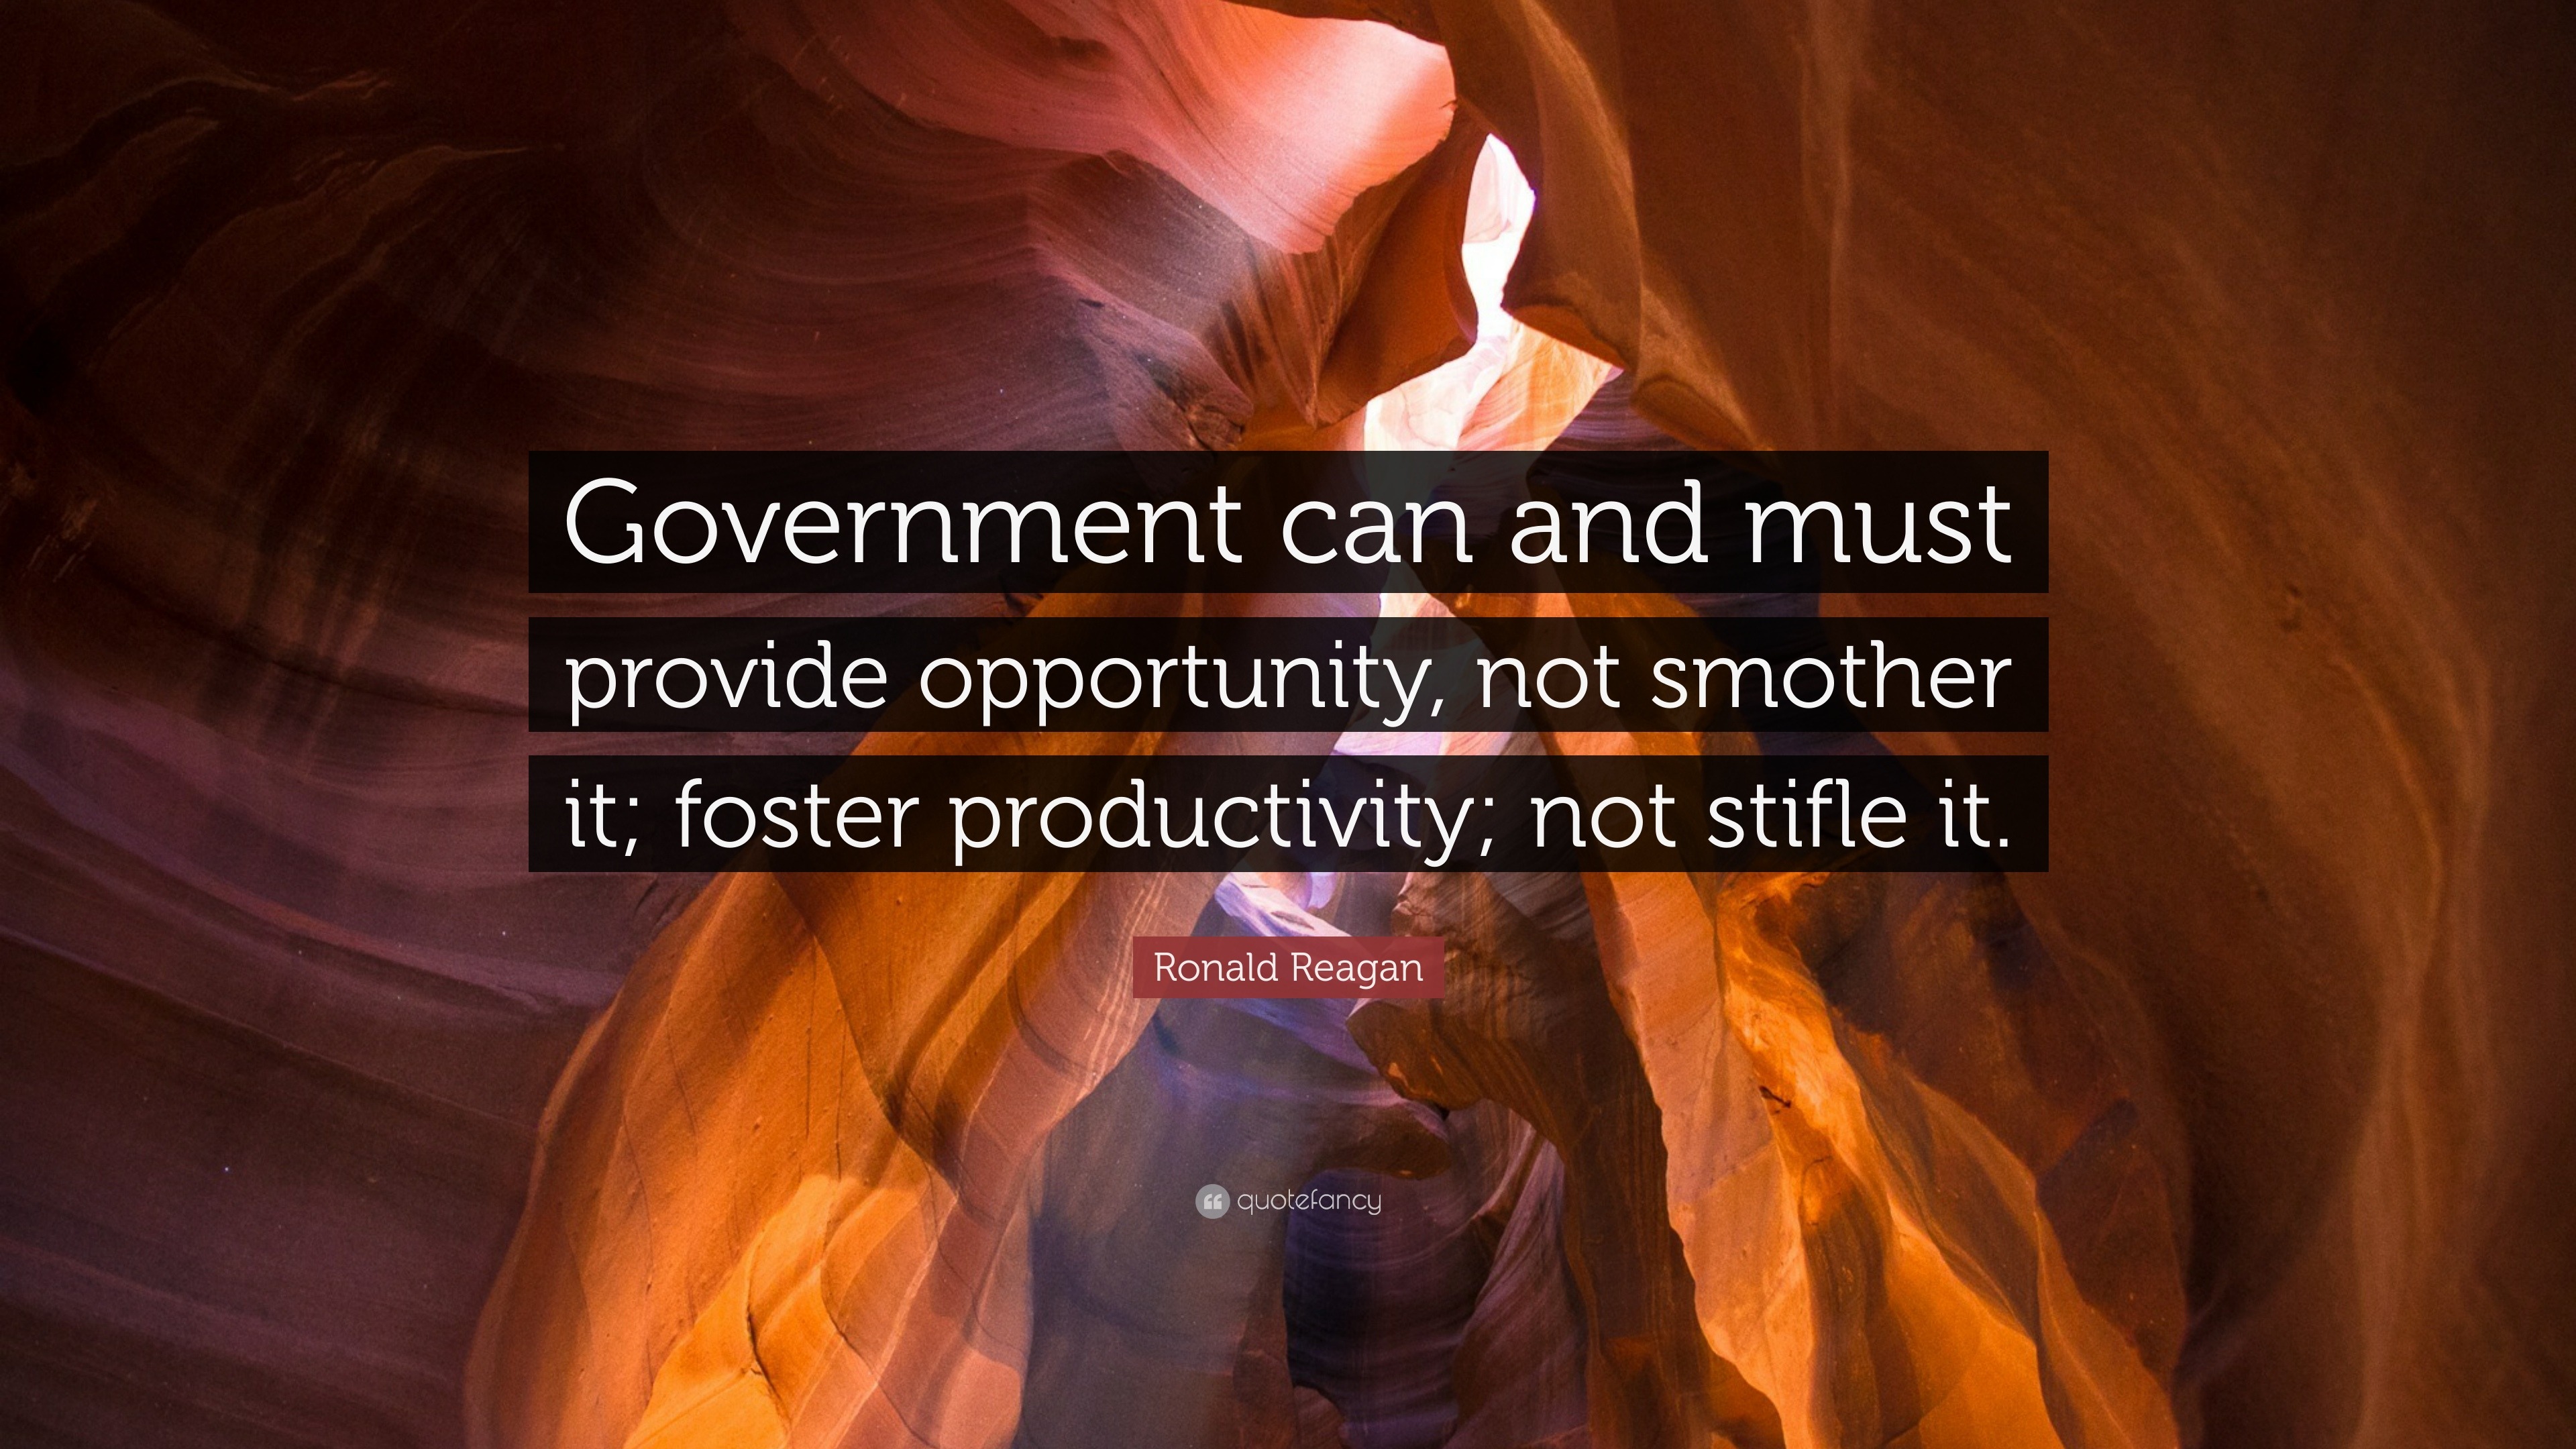 Productivity Quotes (33 wallpapers) - Quotefancy